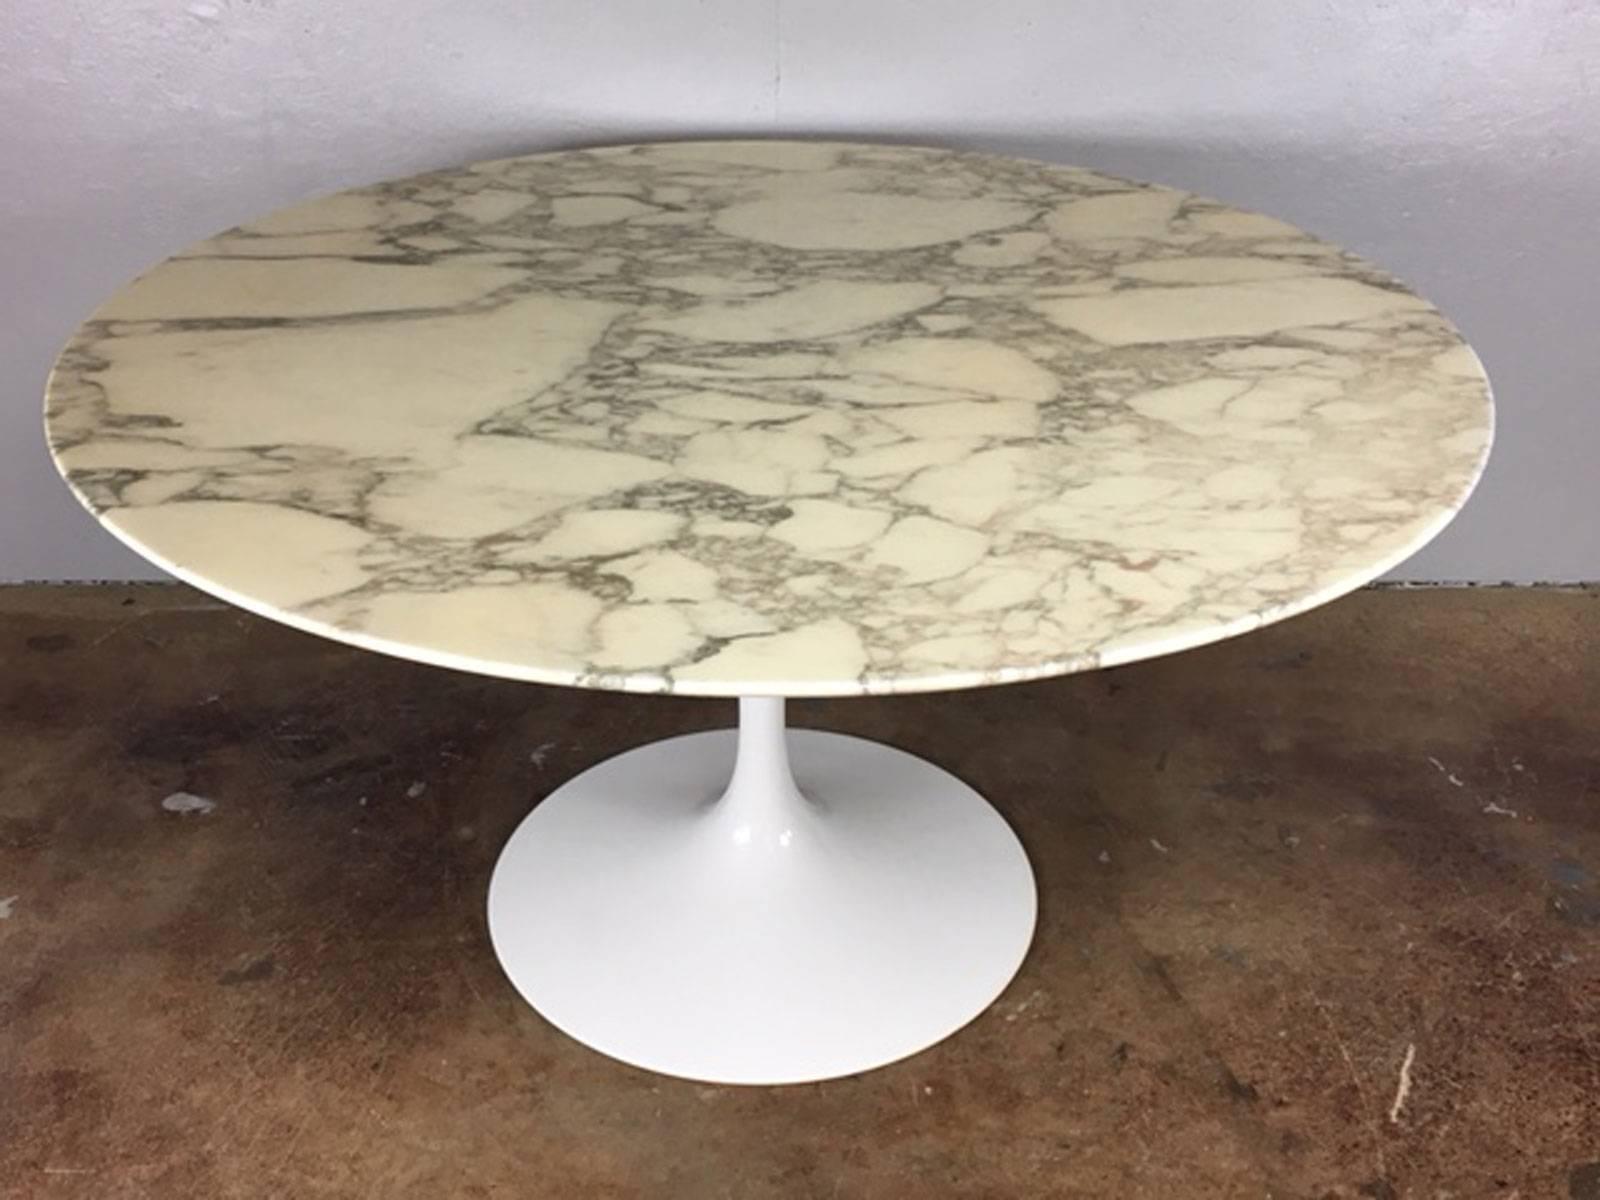 54 inch diameter Eero Saarinen tulip base marble-top dining table for Knoll. Exceptional original condition. The wool rug (made in Germany) is also available for $950.